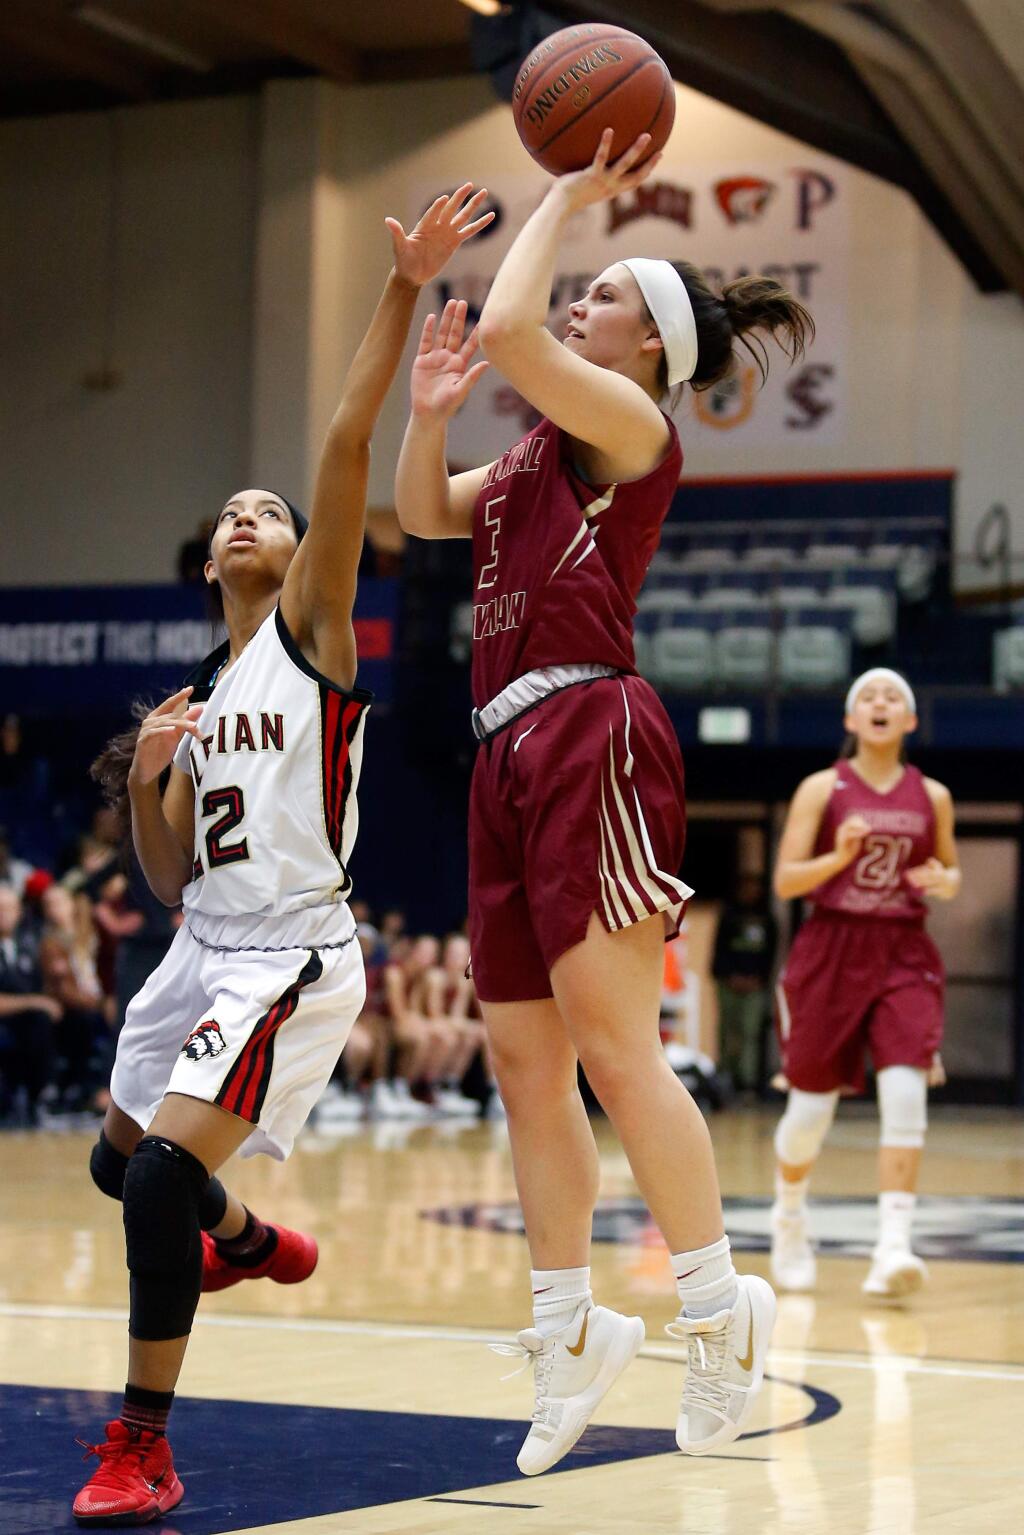 Cardinal Newman's Maiya Flores (3), right, shoots over Salesian's Anjel Galbraith (22) during the first half of the NCS Division 3 girls varsity basketball championship game between Cardinal Newman and Salesian College Prep high schools,at St. Mary's College in Moraga, California, on Saturday, March 3, 2018. (Alvin Jornada / The Press Democrat)